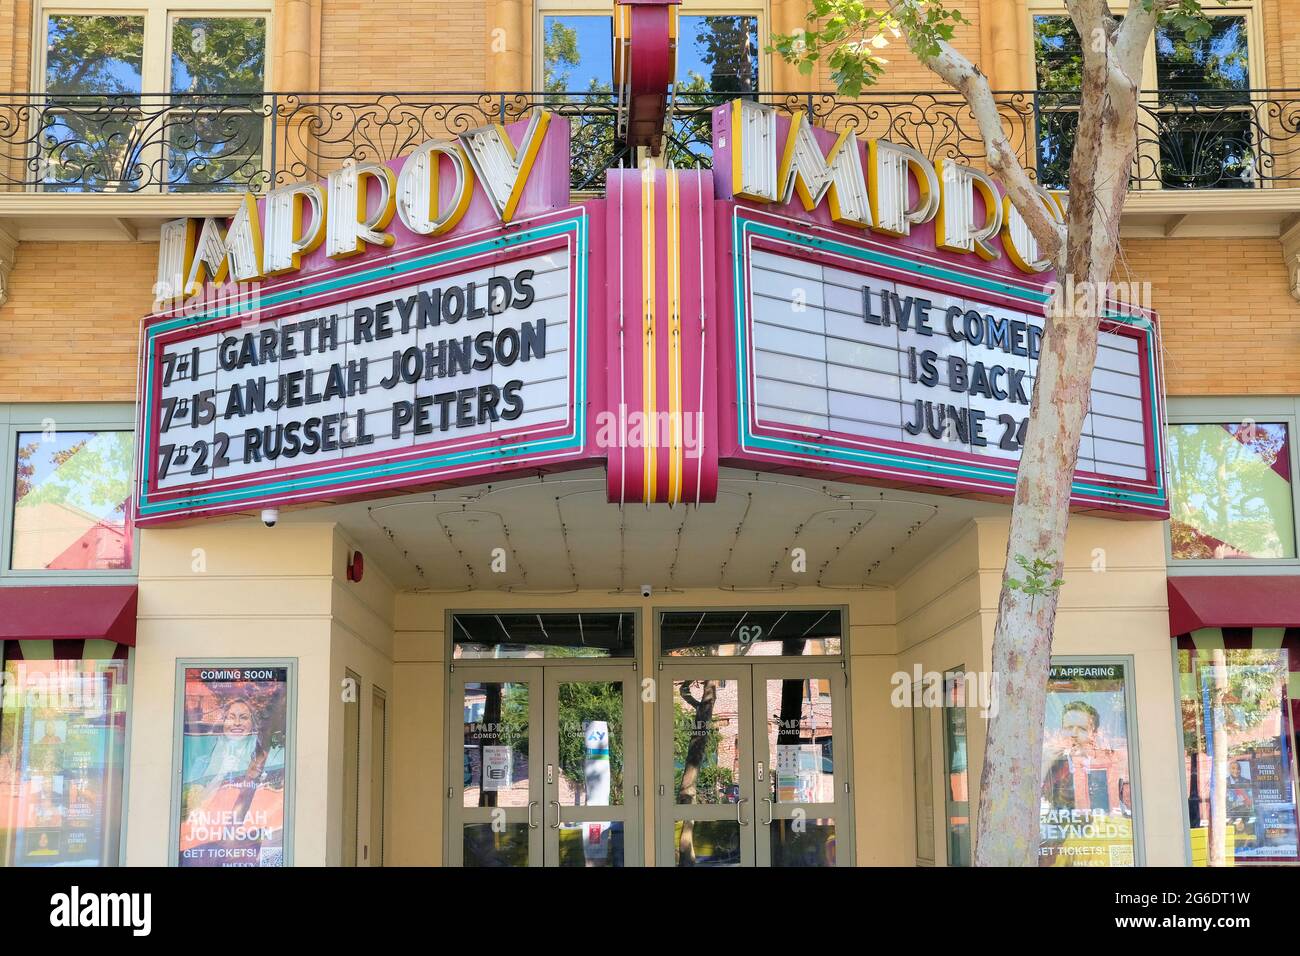 Marque at the San Jose Improv, an Improvisation Comedy Club venue located in downtown San Jose, California. Stock Photo